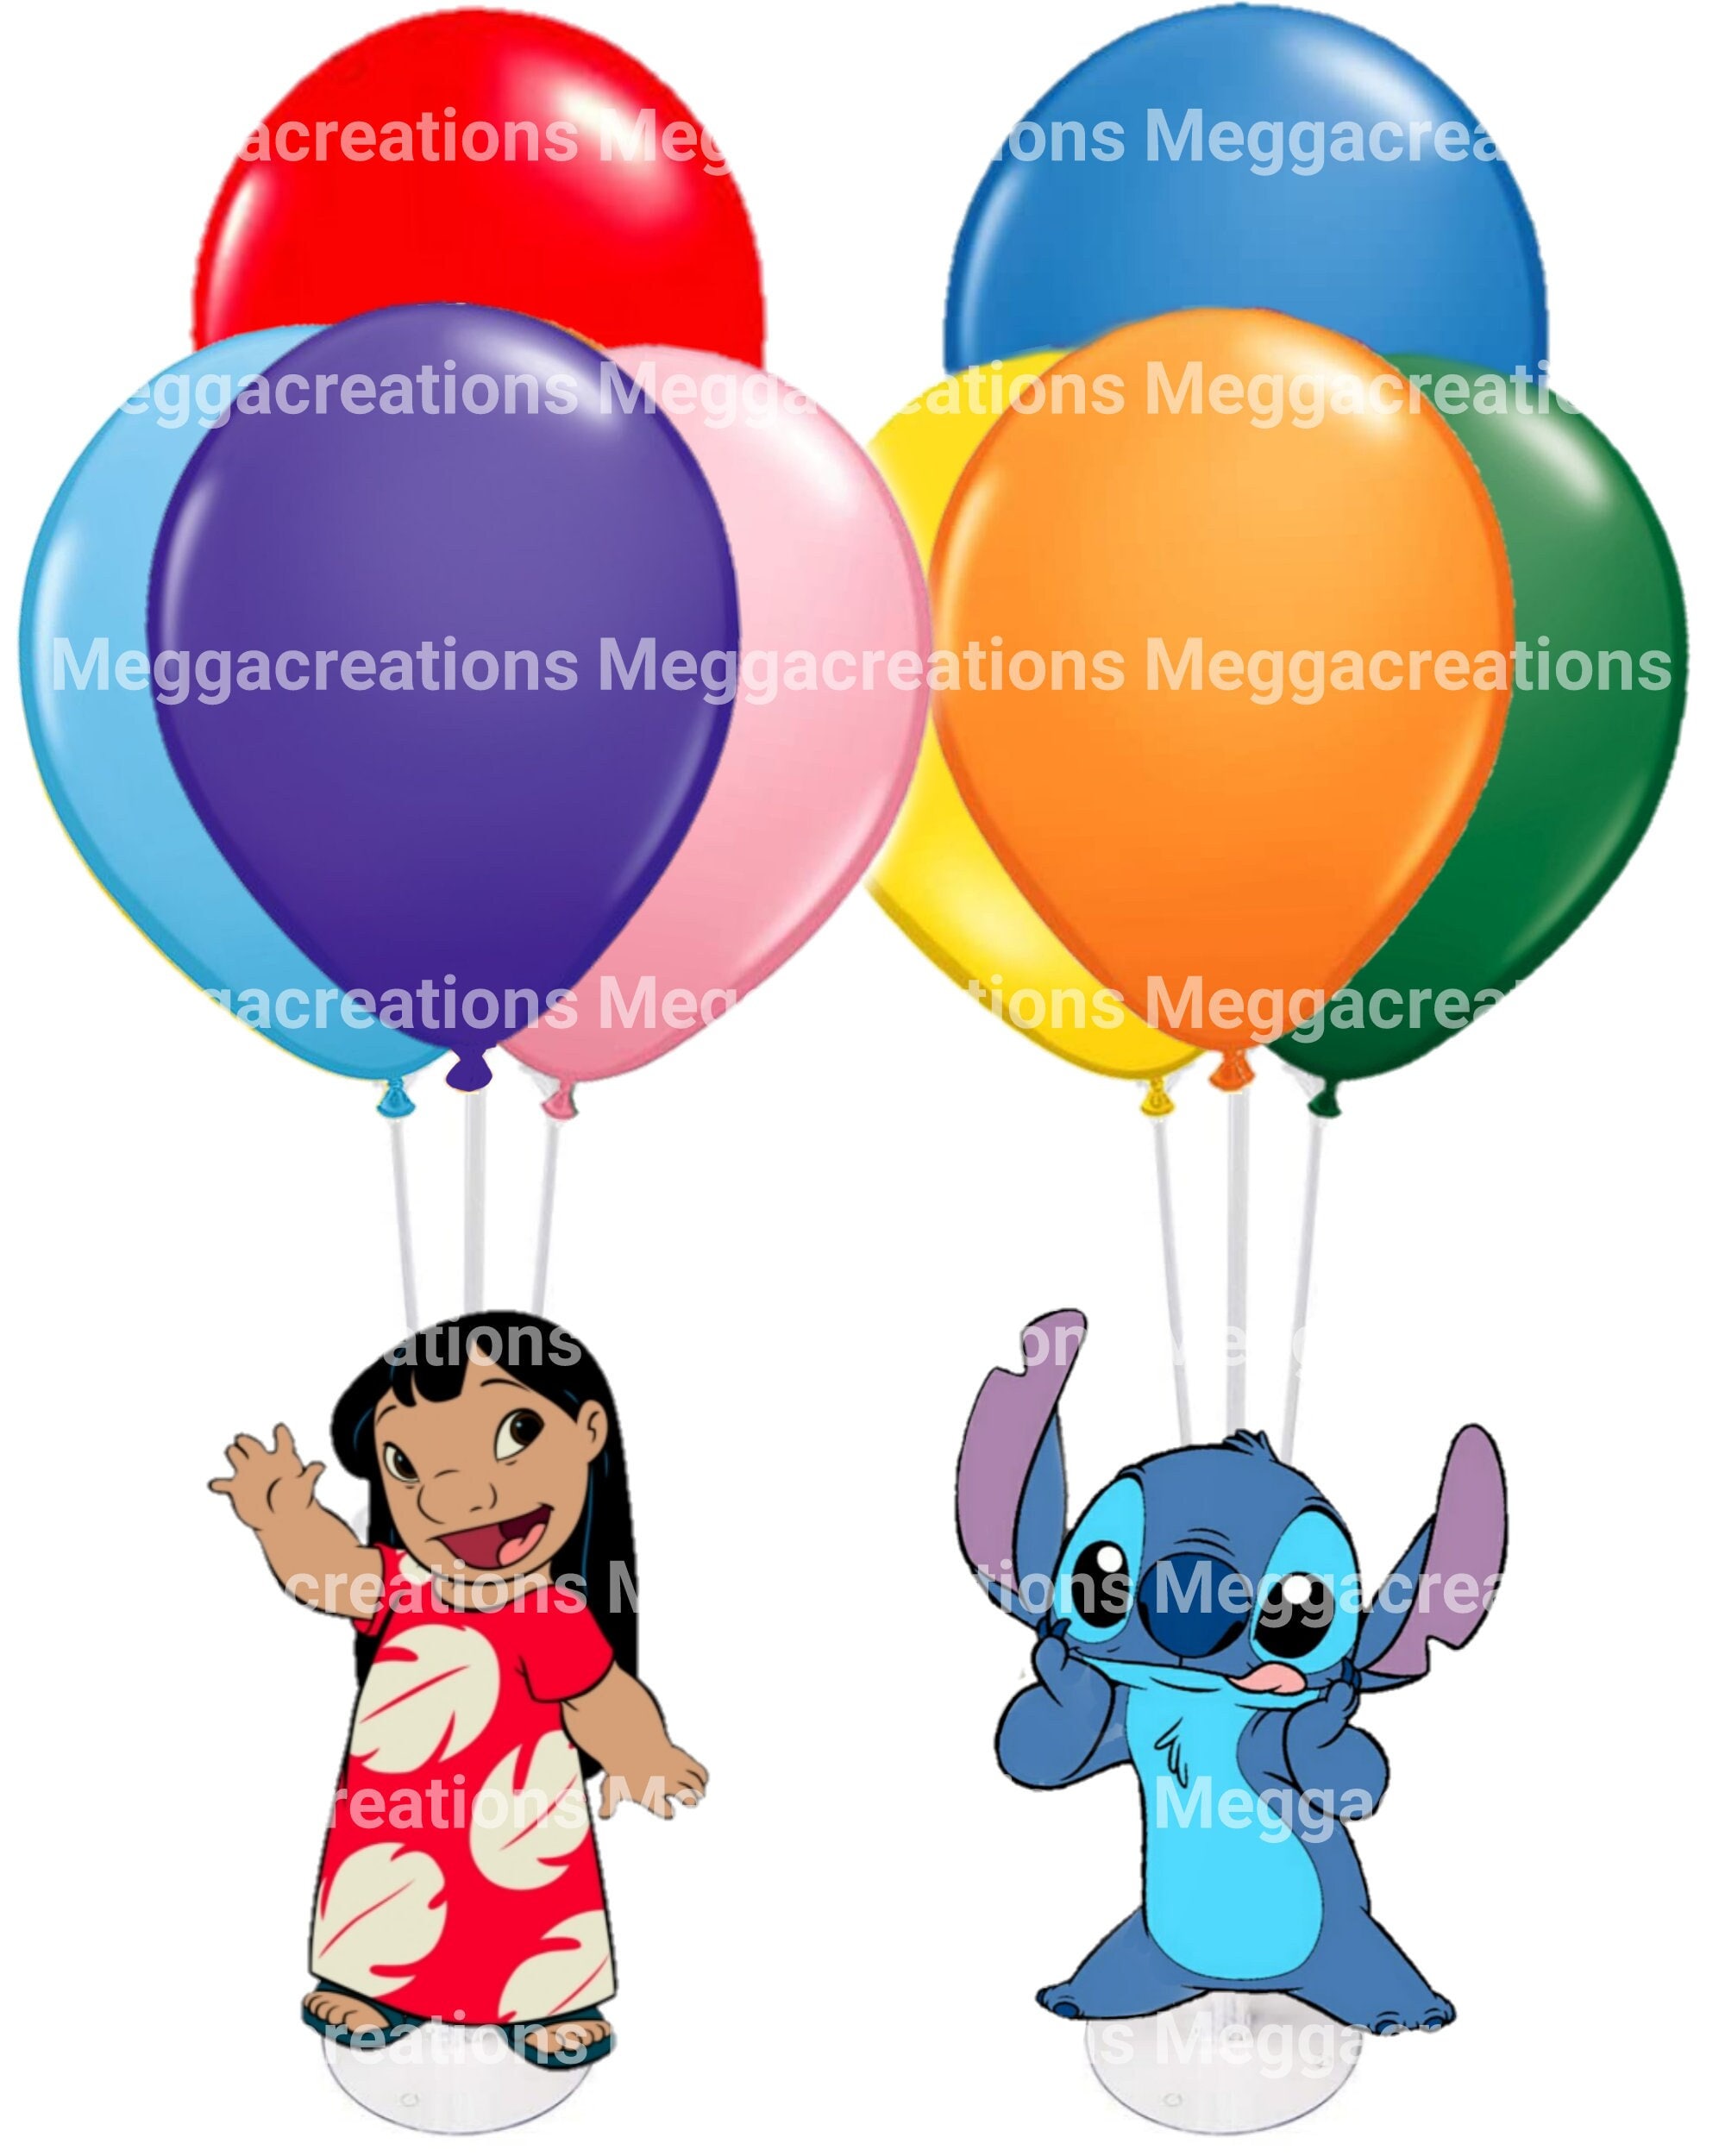 Lilo or Stitch Balloon Centerpieces With Balloons 